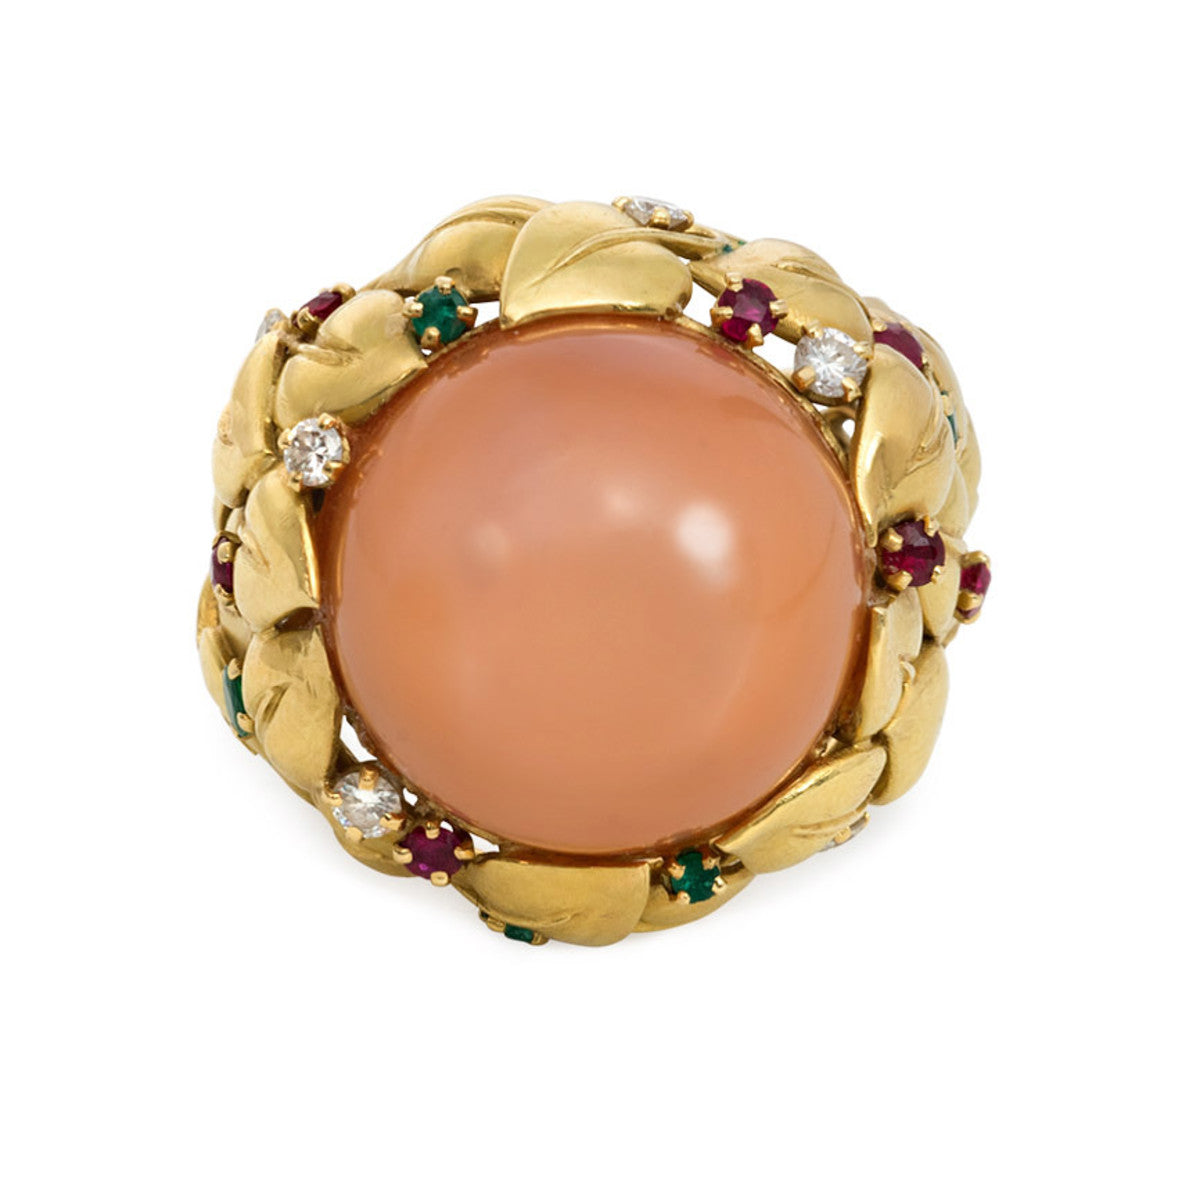 1950s 18KT Yellow Gold Moonstone, Diamond, Emerald & Ruby Cocktail Ring front